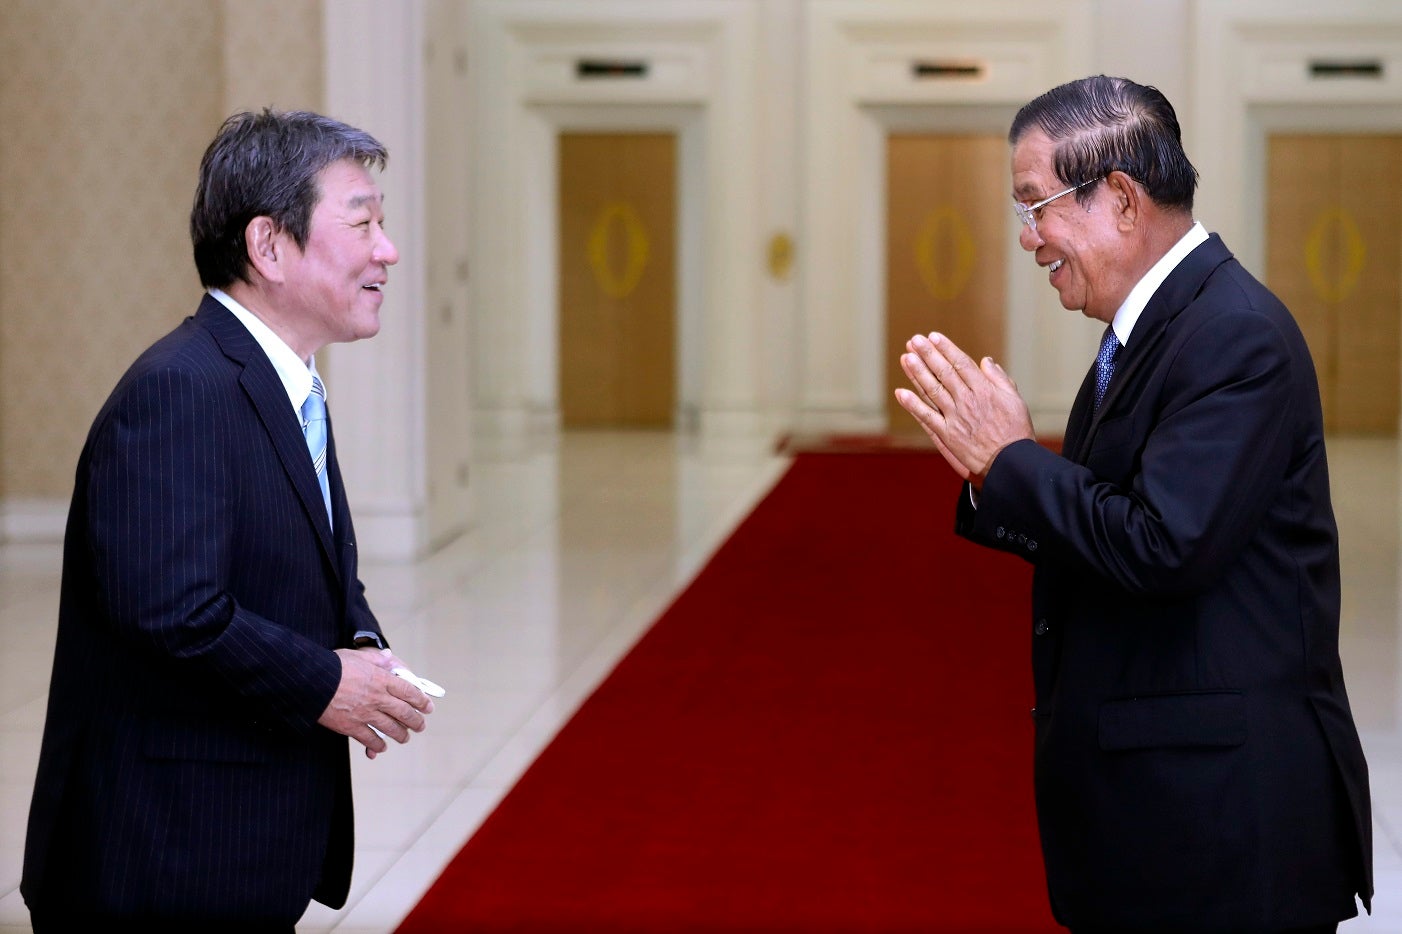 Cambodian Prime Minister Hun Sen, right, greets with Japanese Foreign Minister Toshimitsu Motegi, left, before a meeting at the Peace Palace, in Phnom Penh, Cambodia on Saturday, August 22, 2020. 